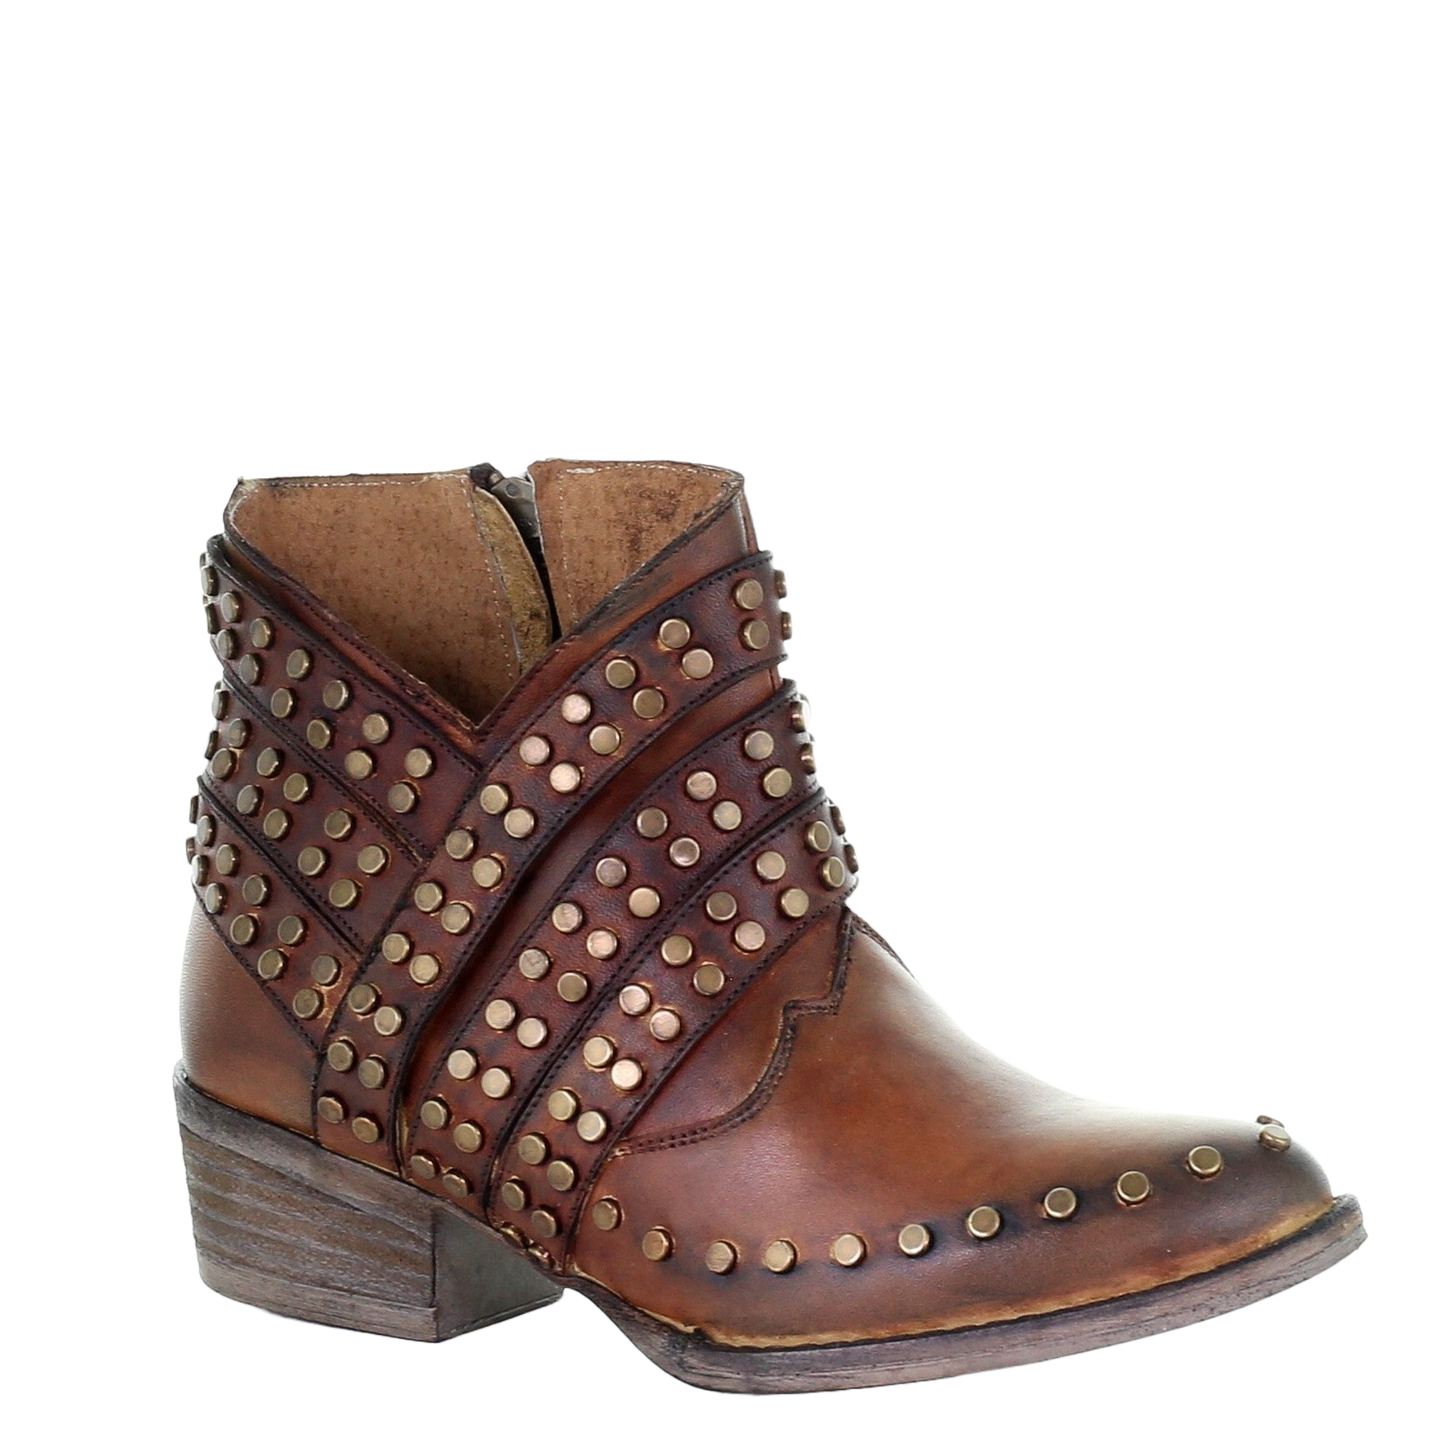 Circle G by Corral Ladies Studded Straps Bootie Shoe Q5096